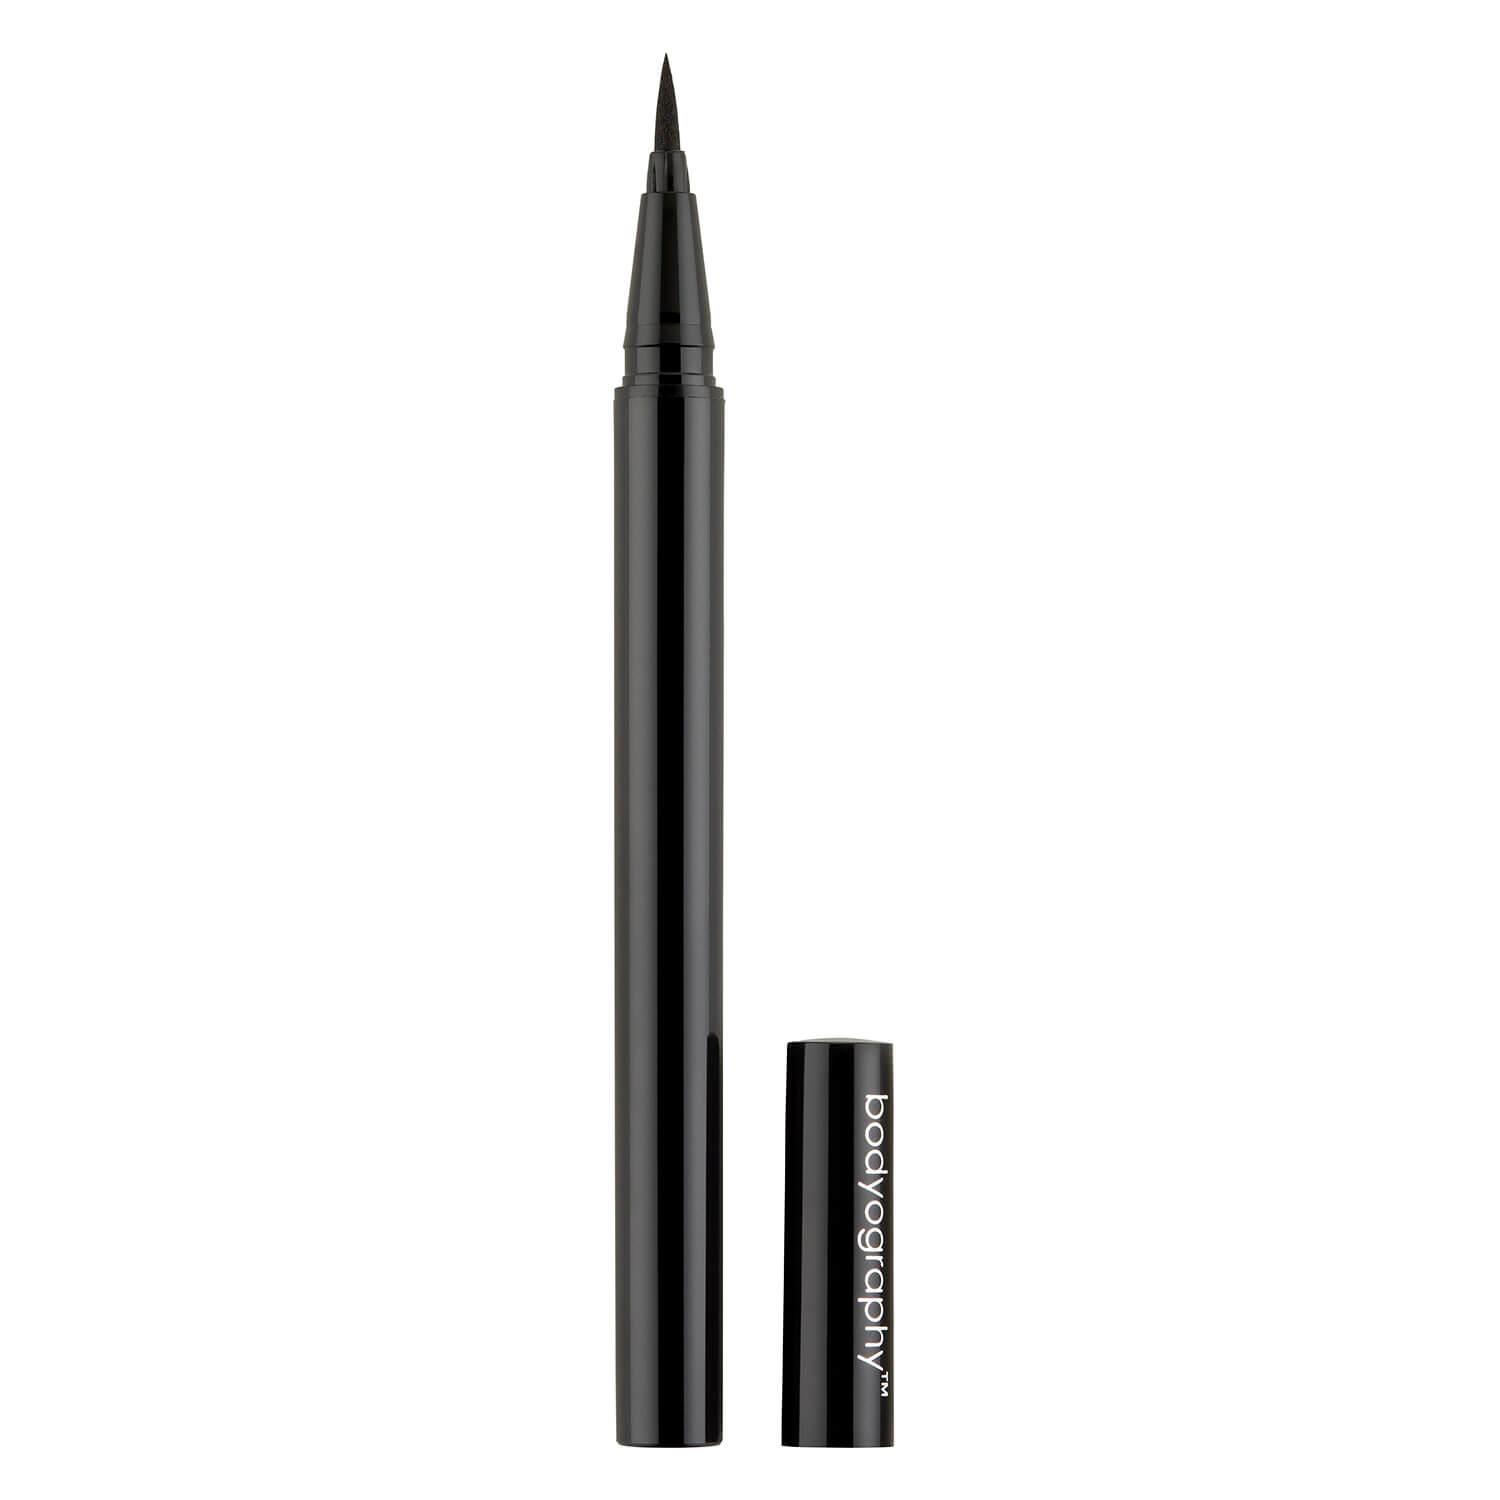 bodyography Eyes - On Point Liquid Liner Pen